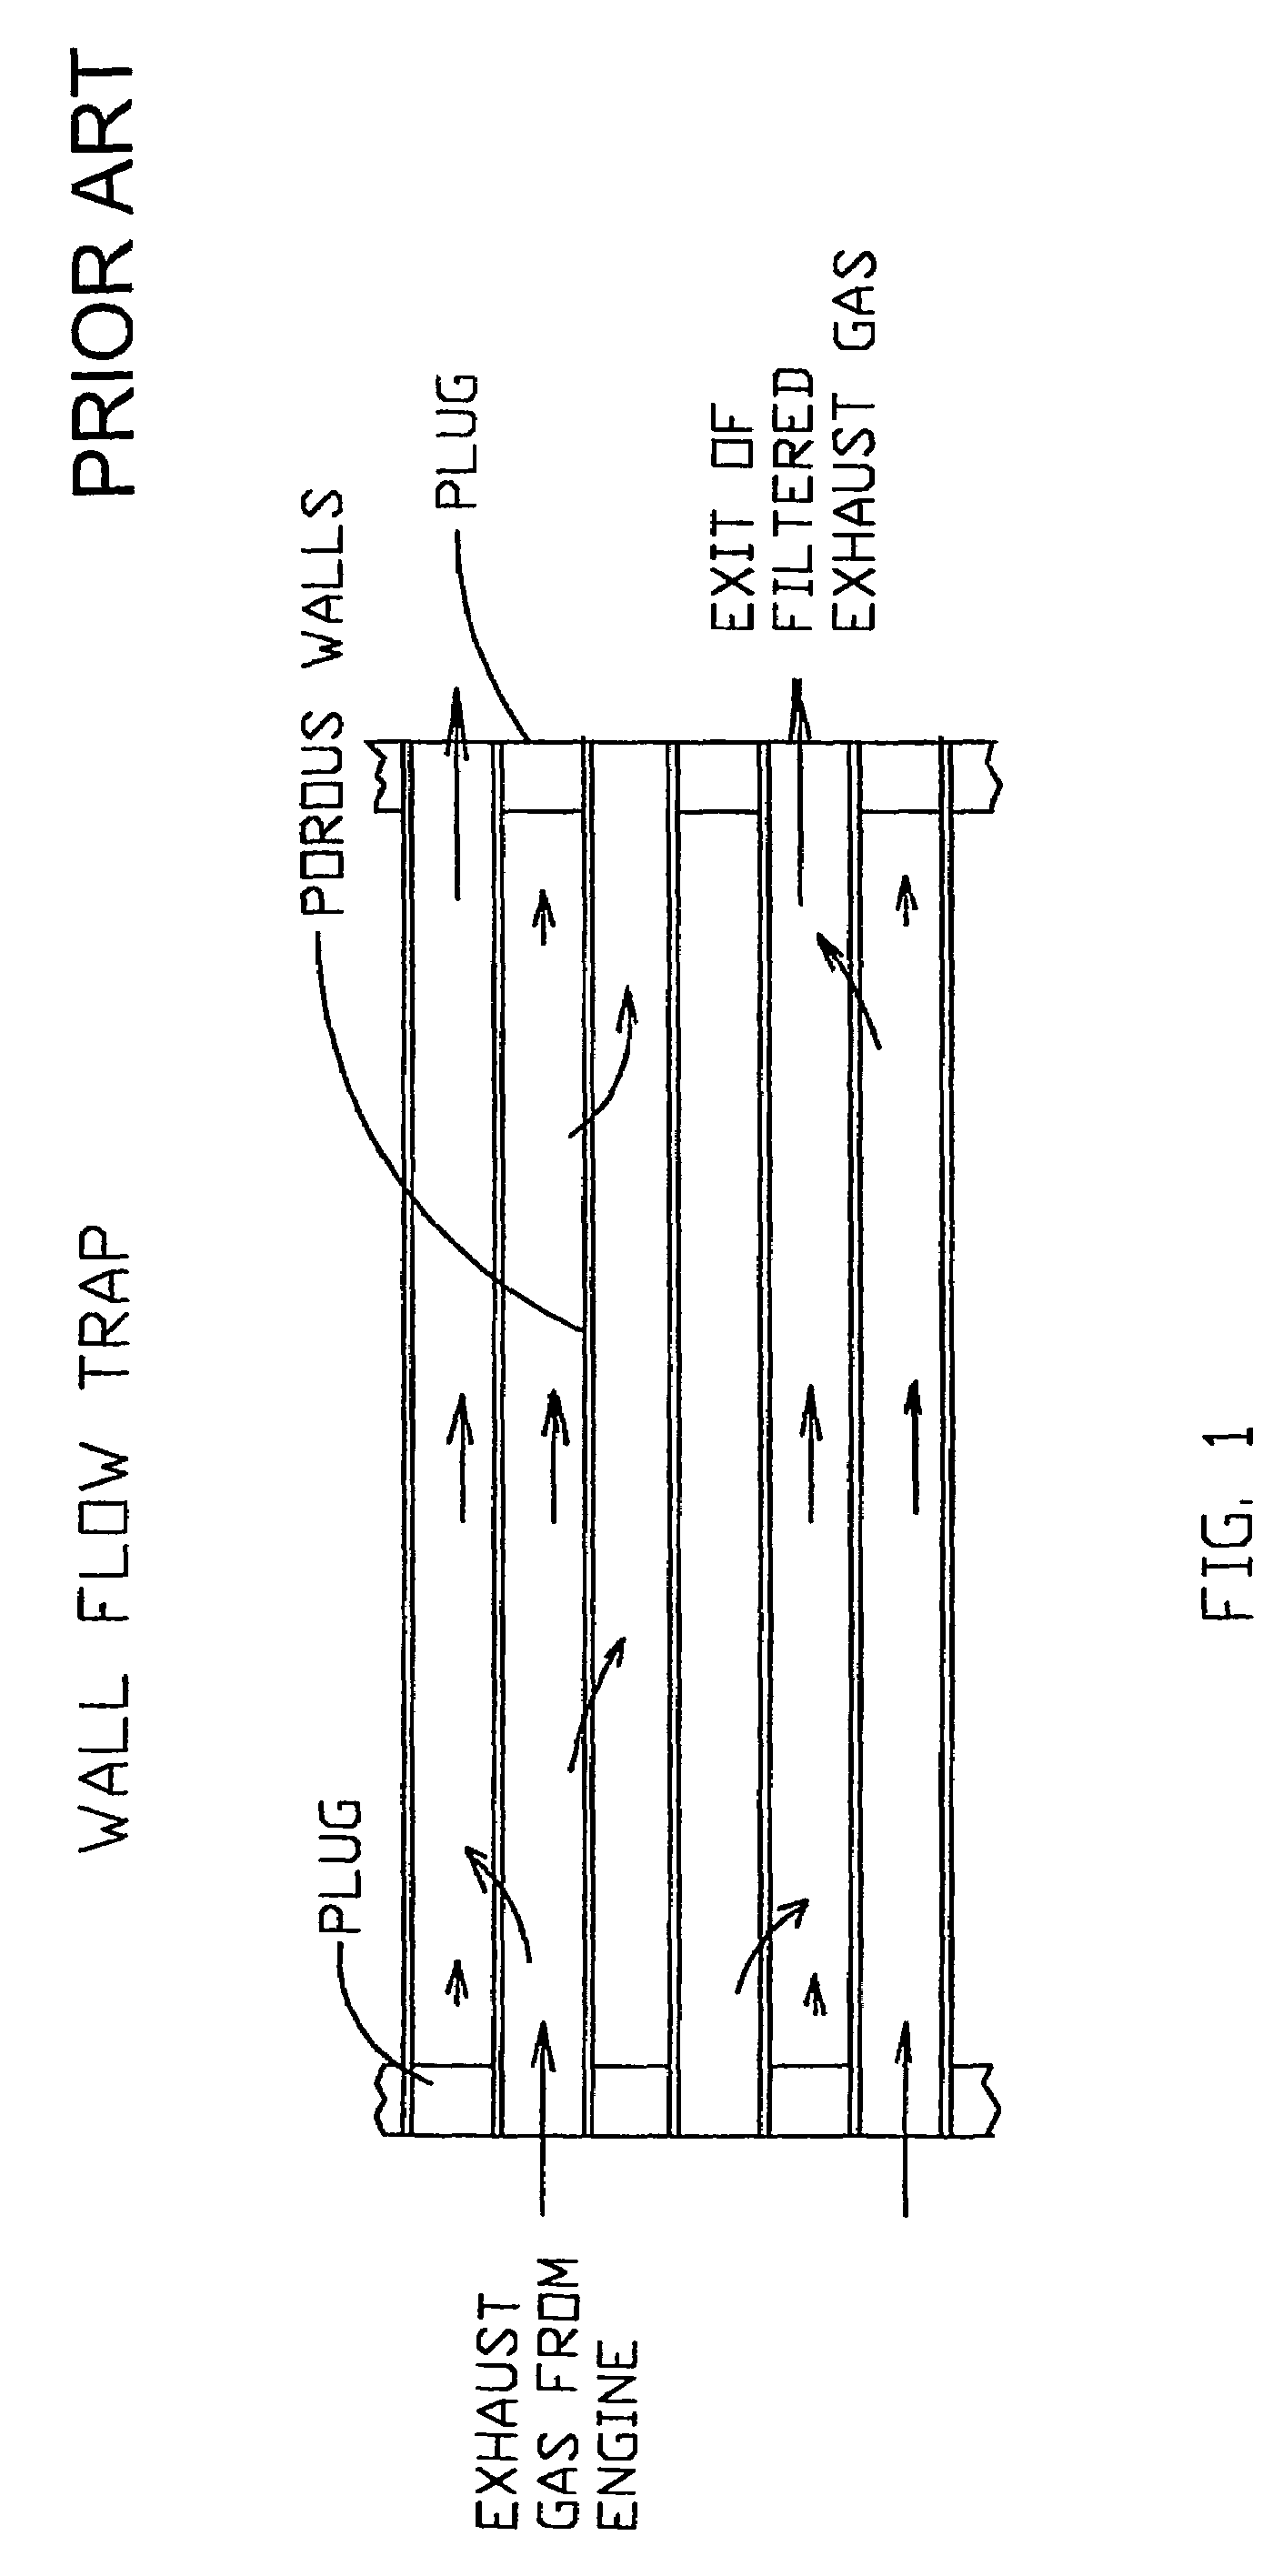 Apparatus and method for filtering particulate and reducing NOx emissions